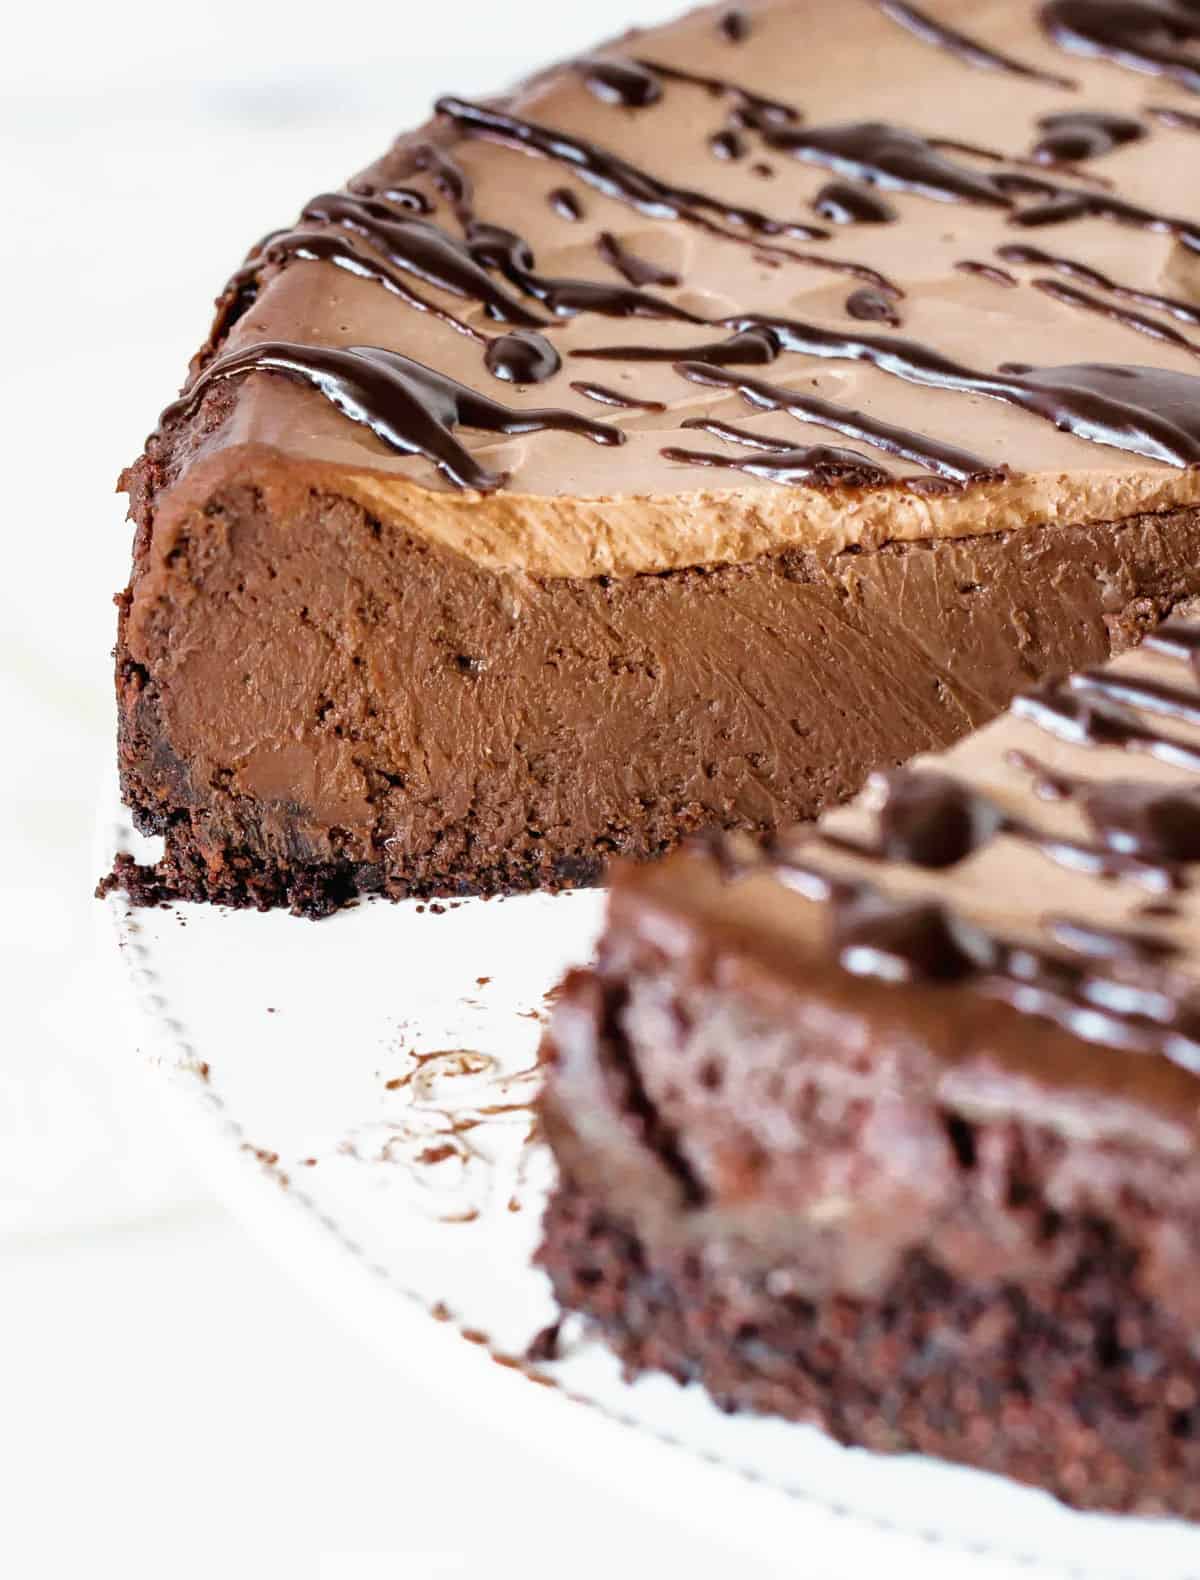 Close up of inside of chocolate cheesecake on white plate.